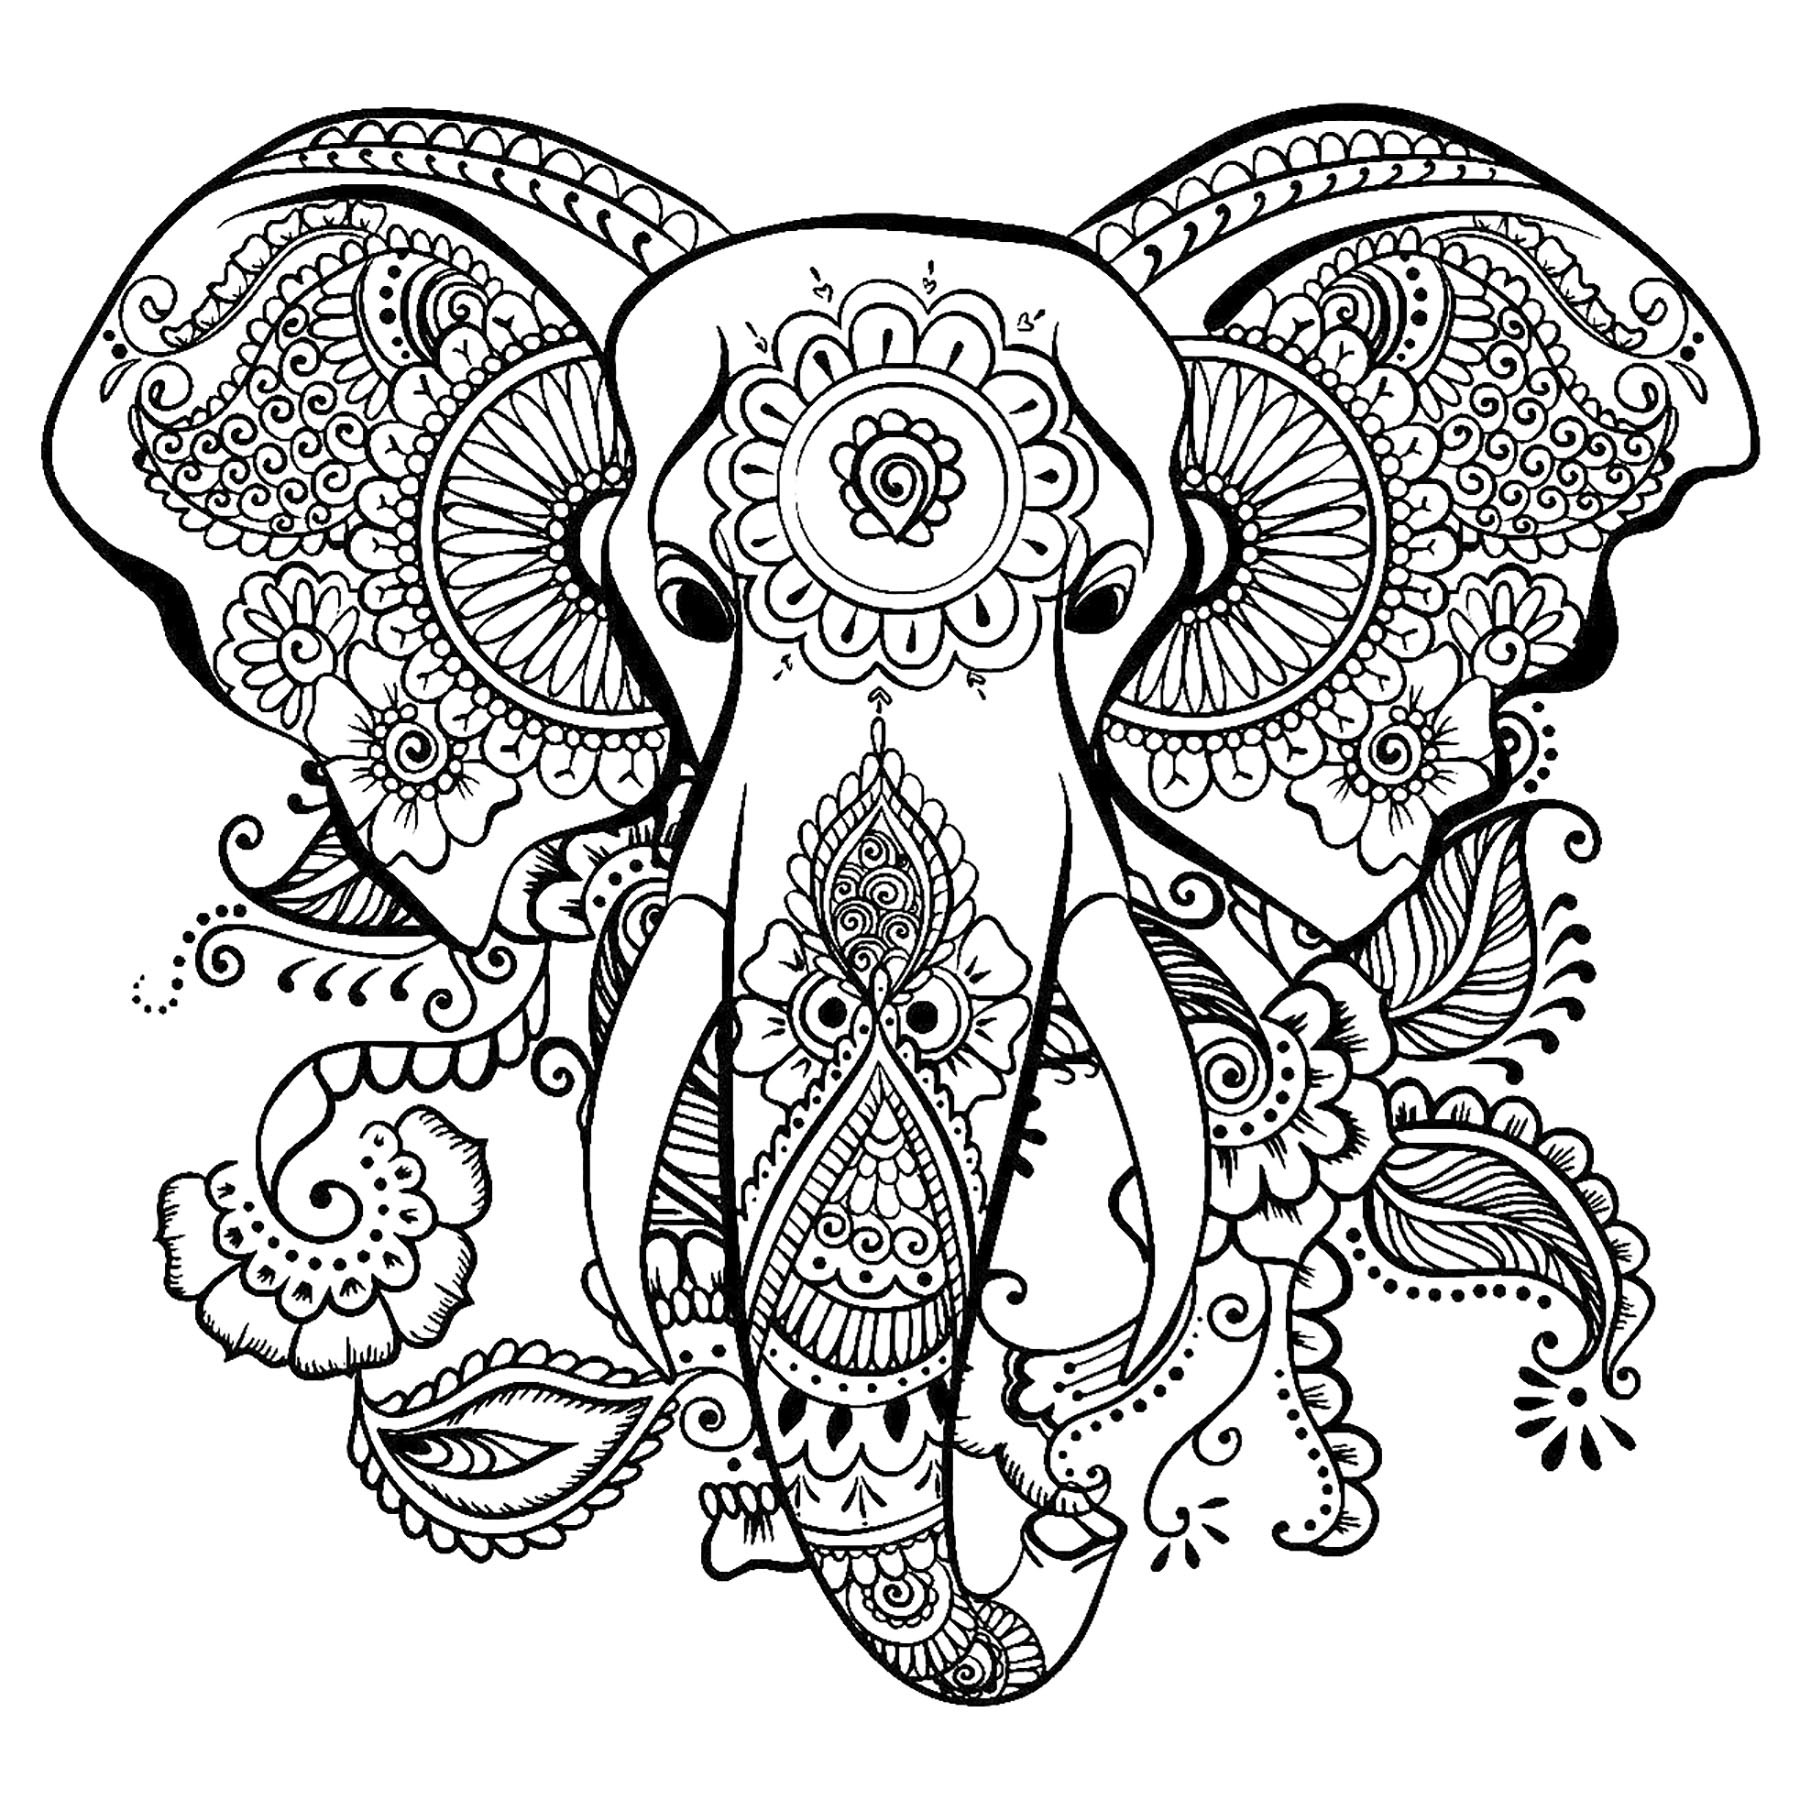 Elephant Adult Coloring Pages
 Elegant drawing of an elephant Elephants Adult Coloring